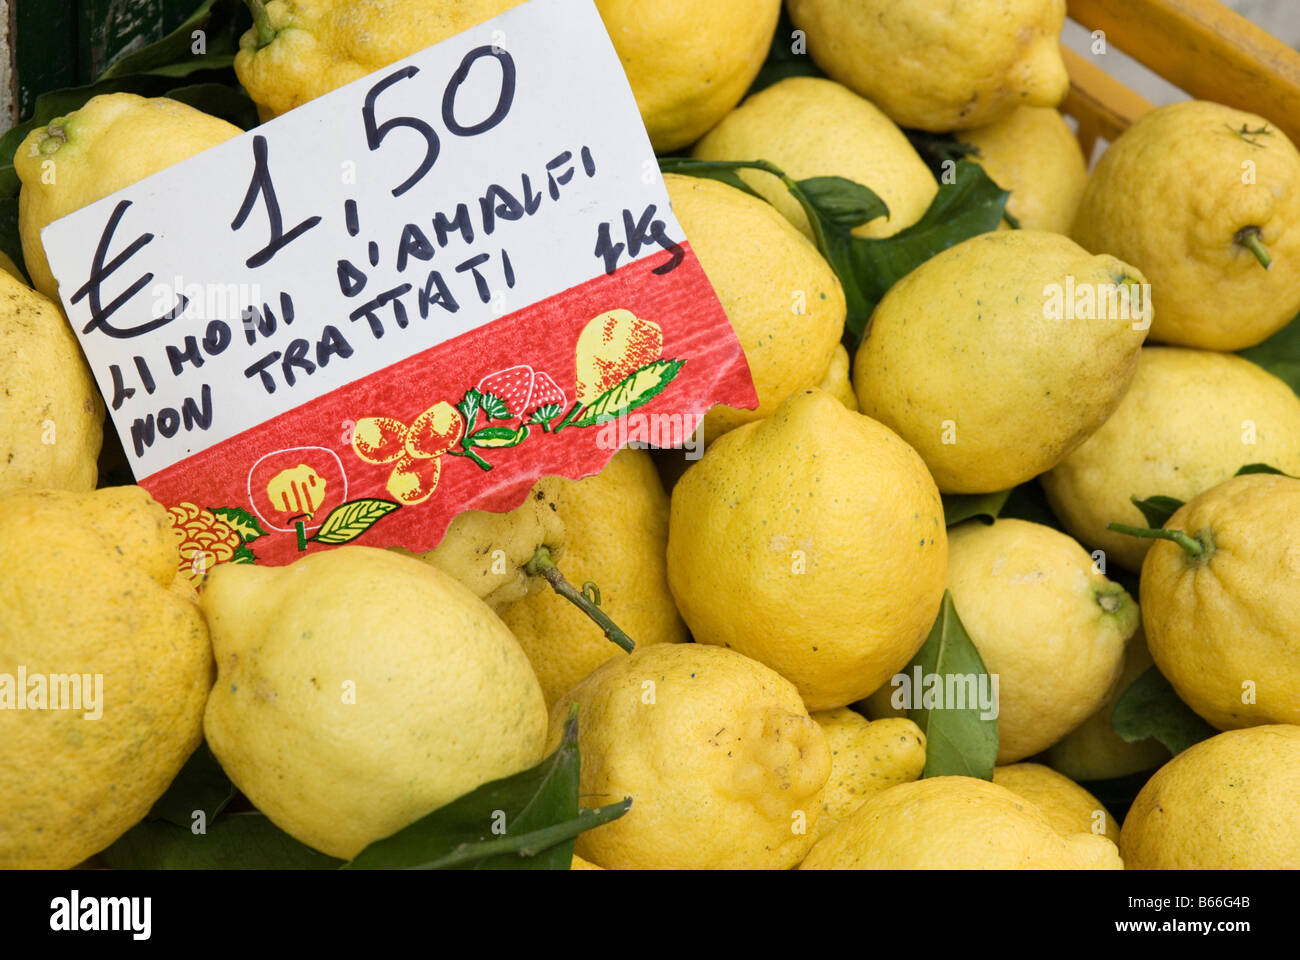 Large local lemons in a crate outside a shop in Amalfi, Campania, Italy Stock Photo